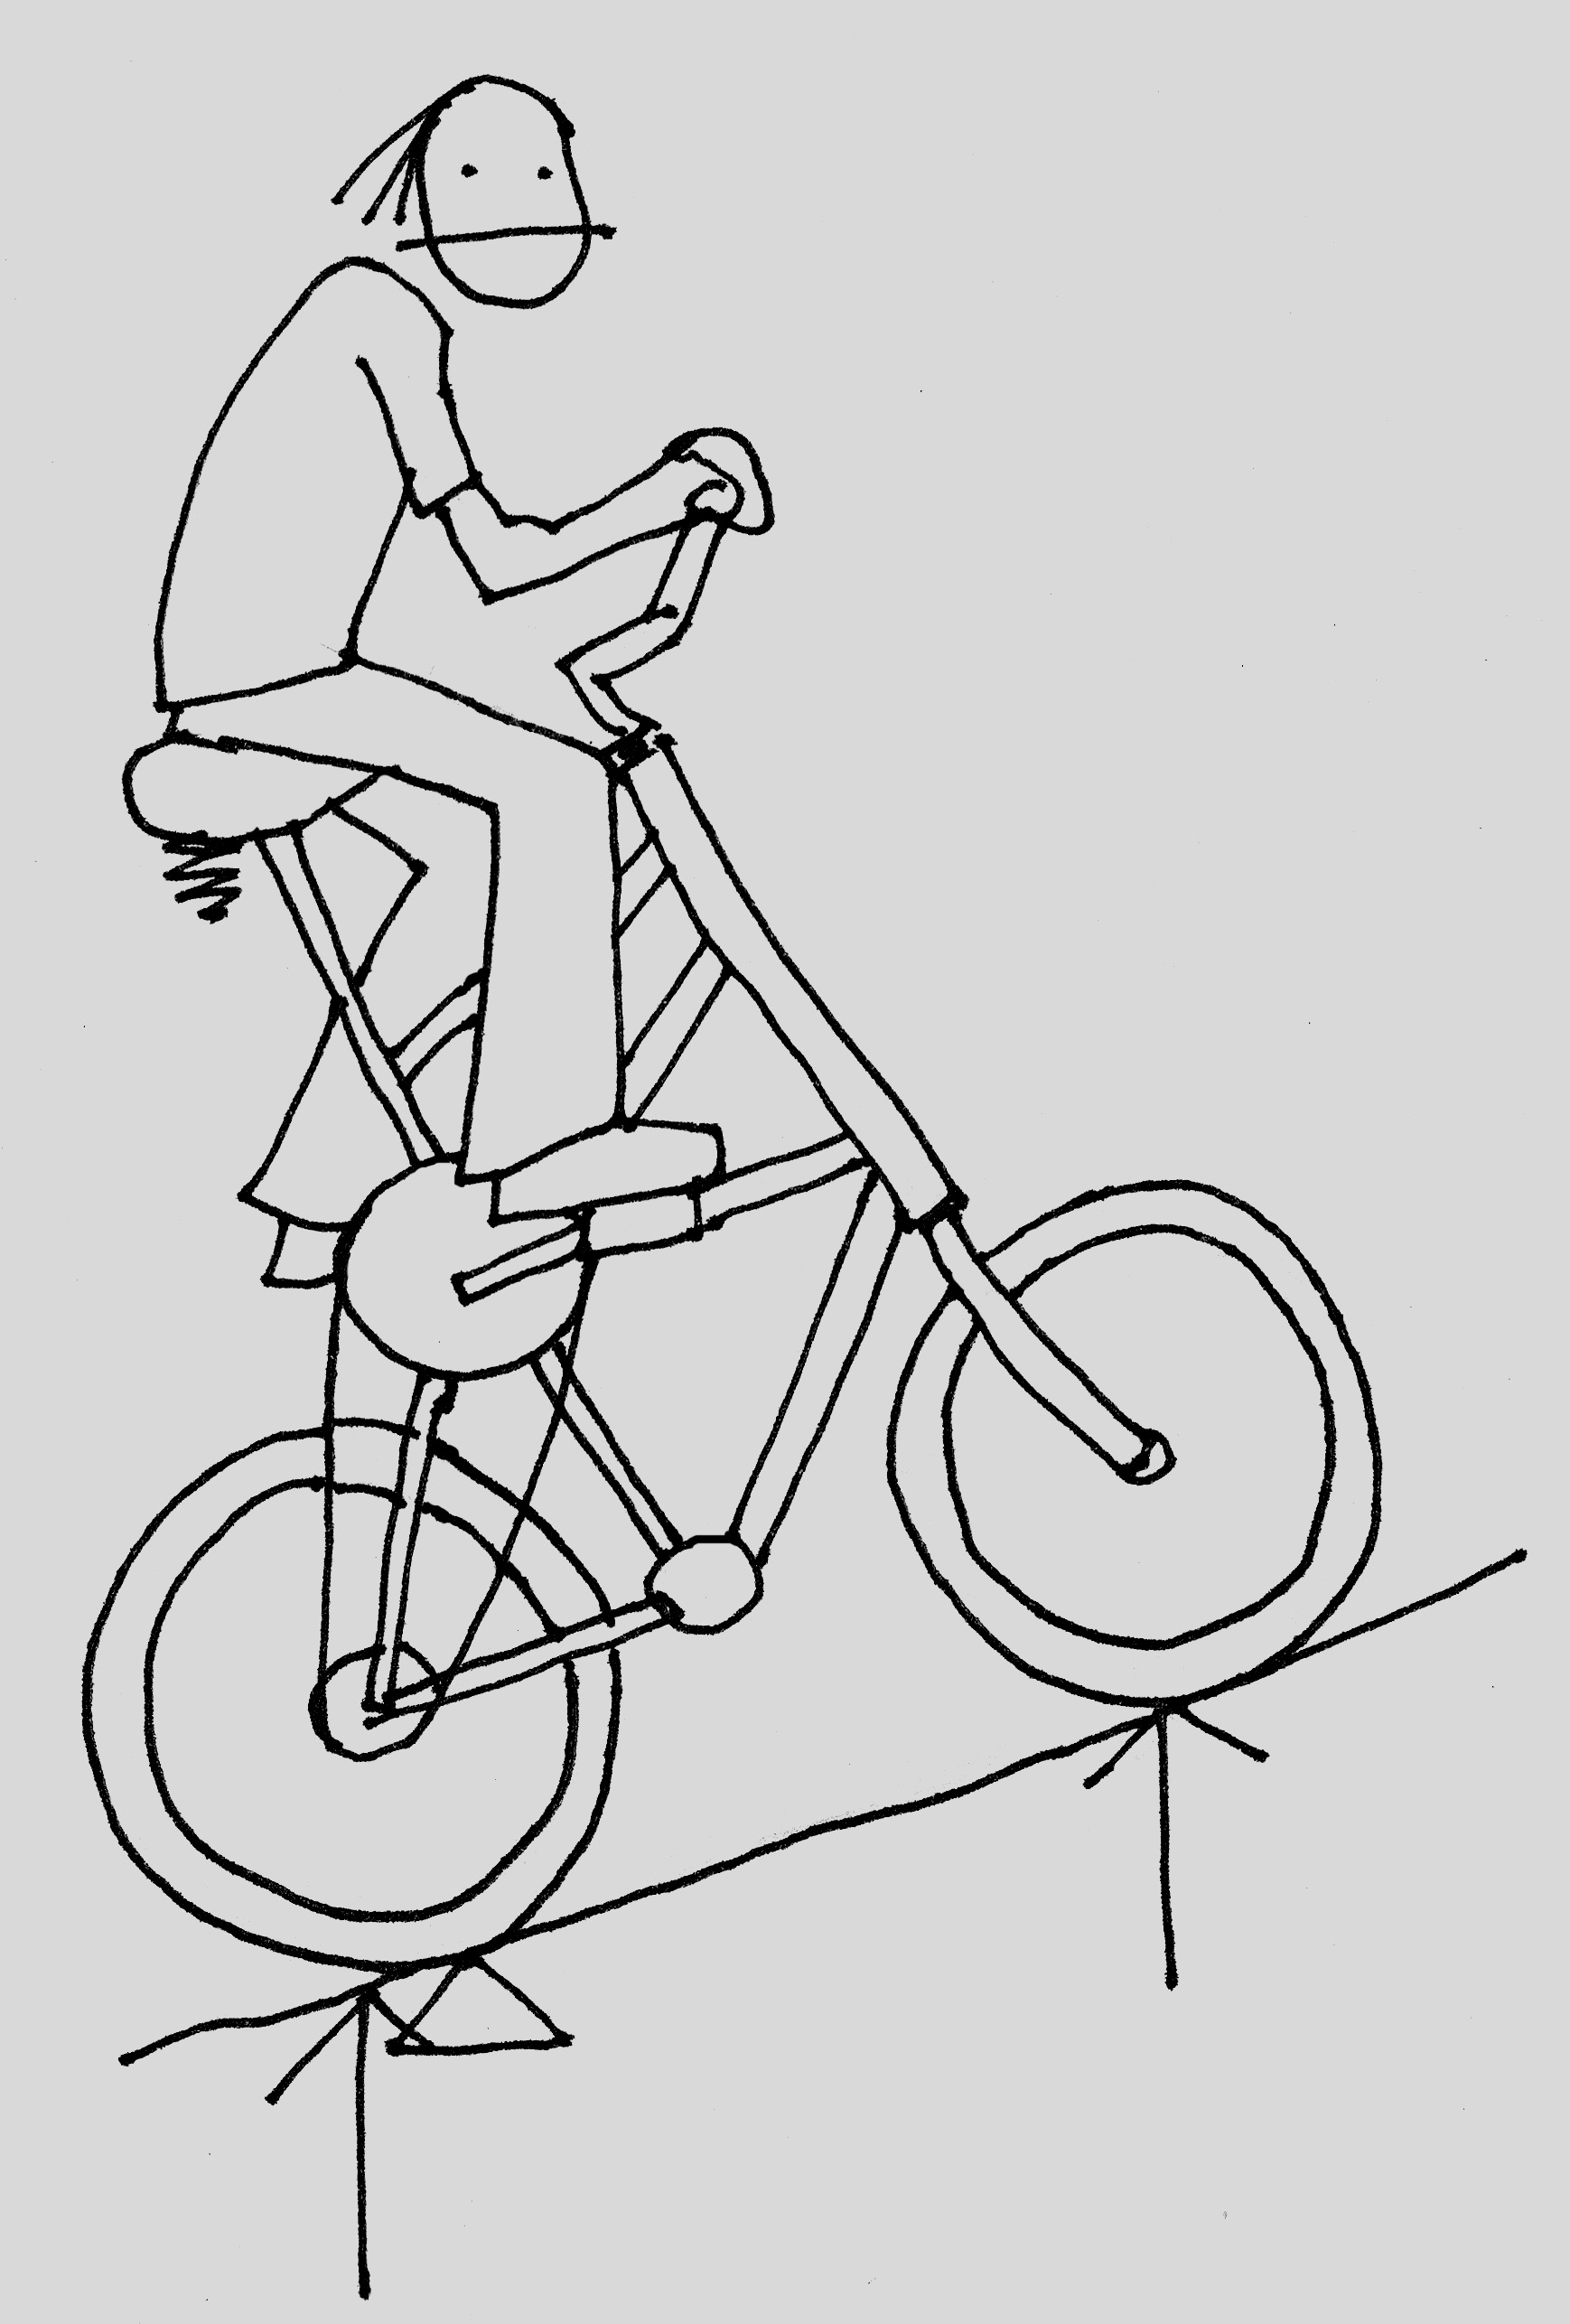 tallbike and rider going uphill, center of gravity dangerously toward the rear wheel